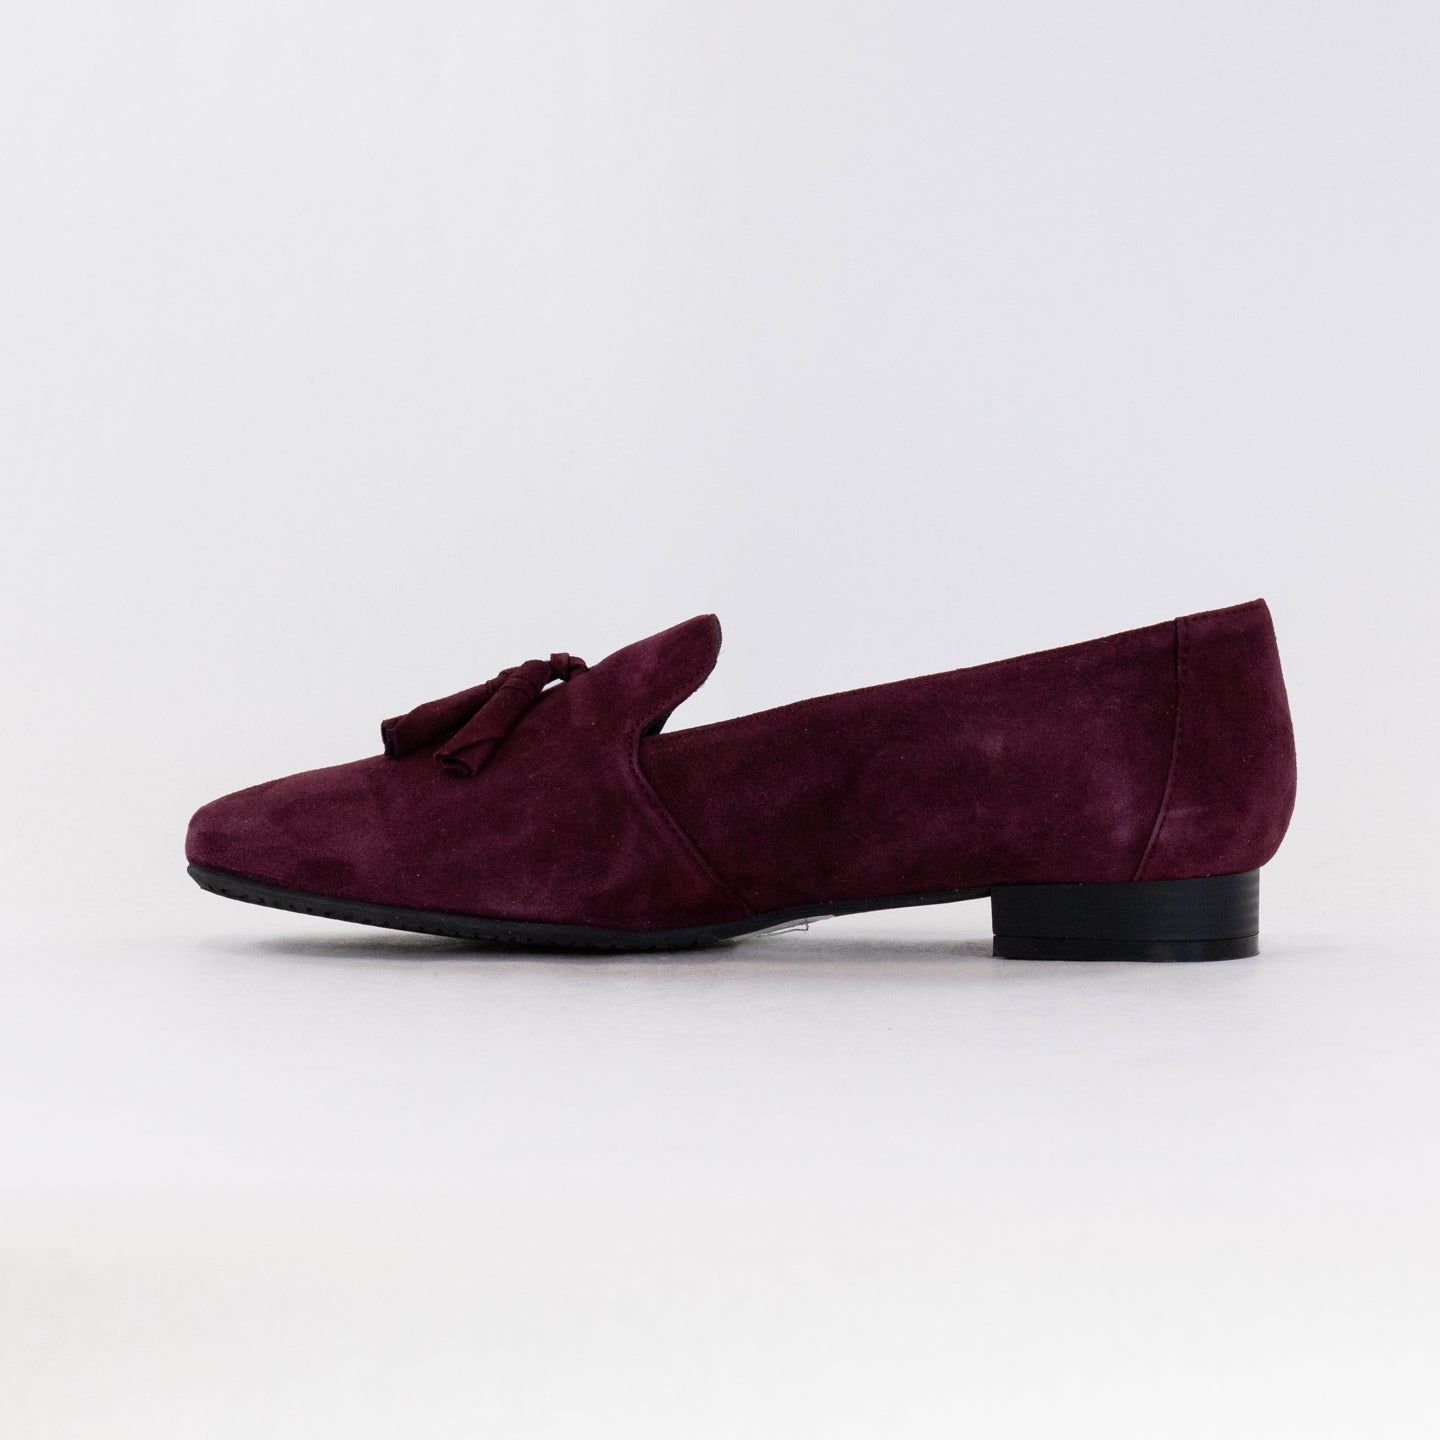 Eric Michael Rana Loafer (Women's) - Wine Suede